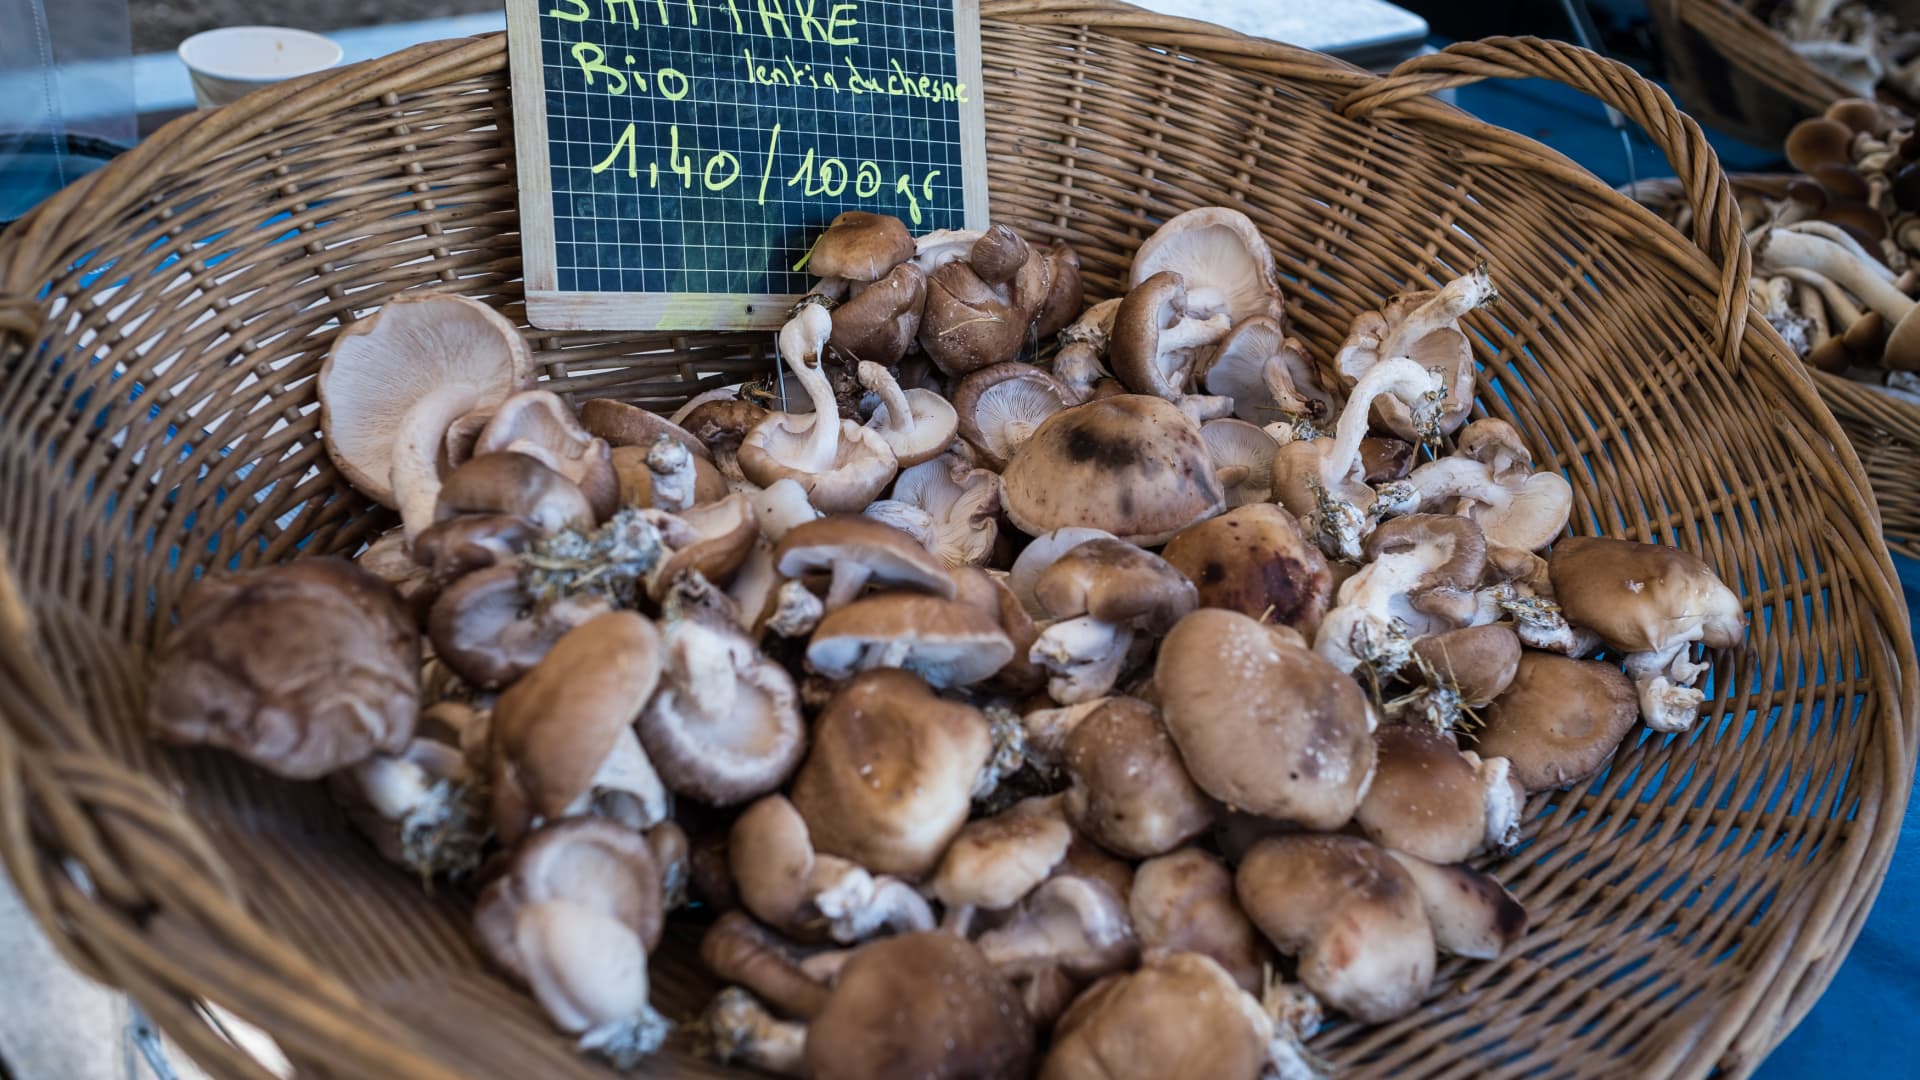 Shiitake mushrooms are commonly used in Asian cooking and have been found to have immune-stimulating activities.